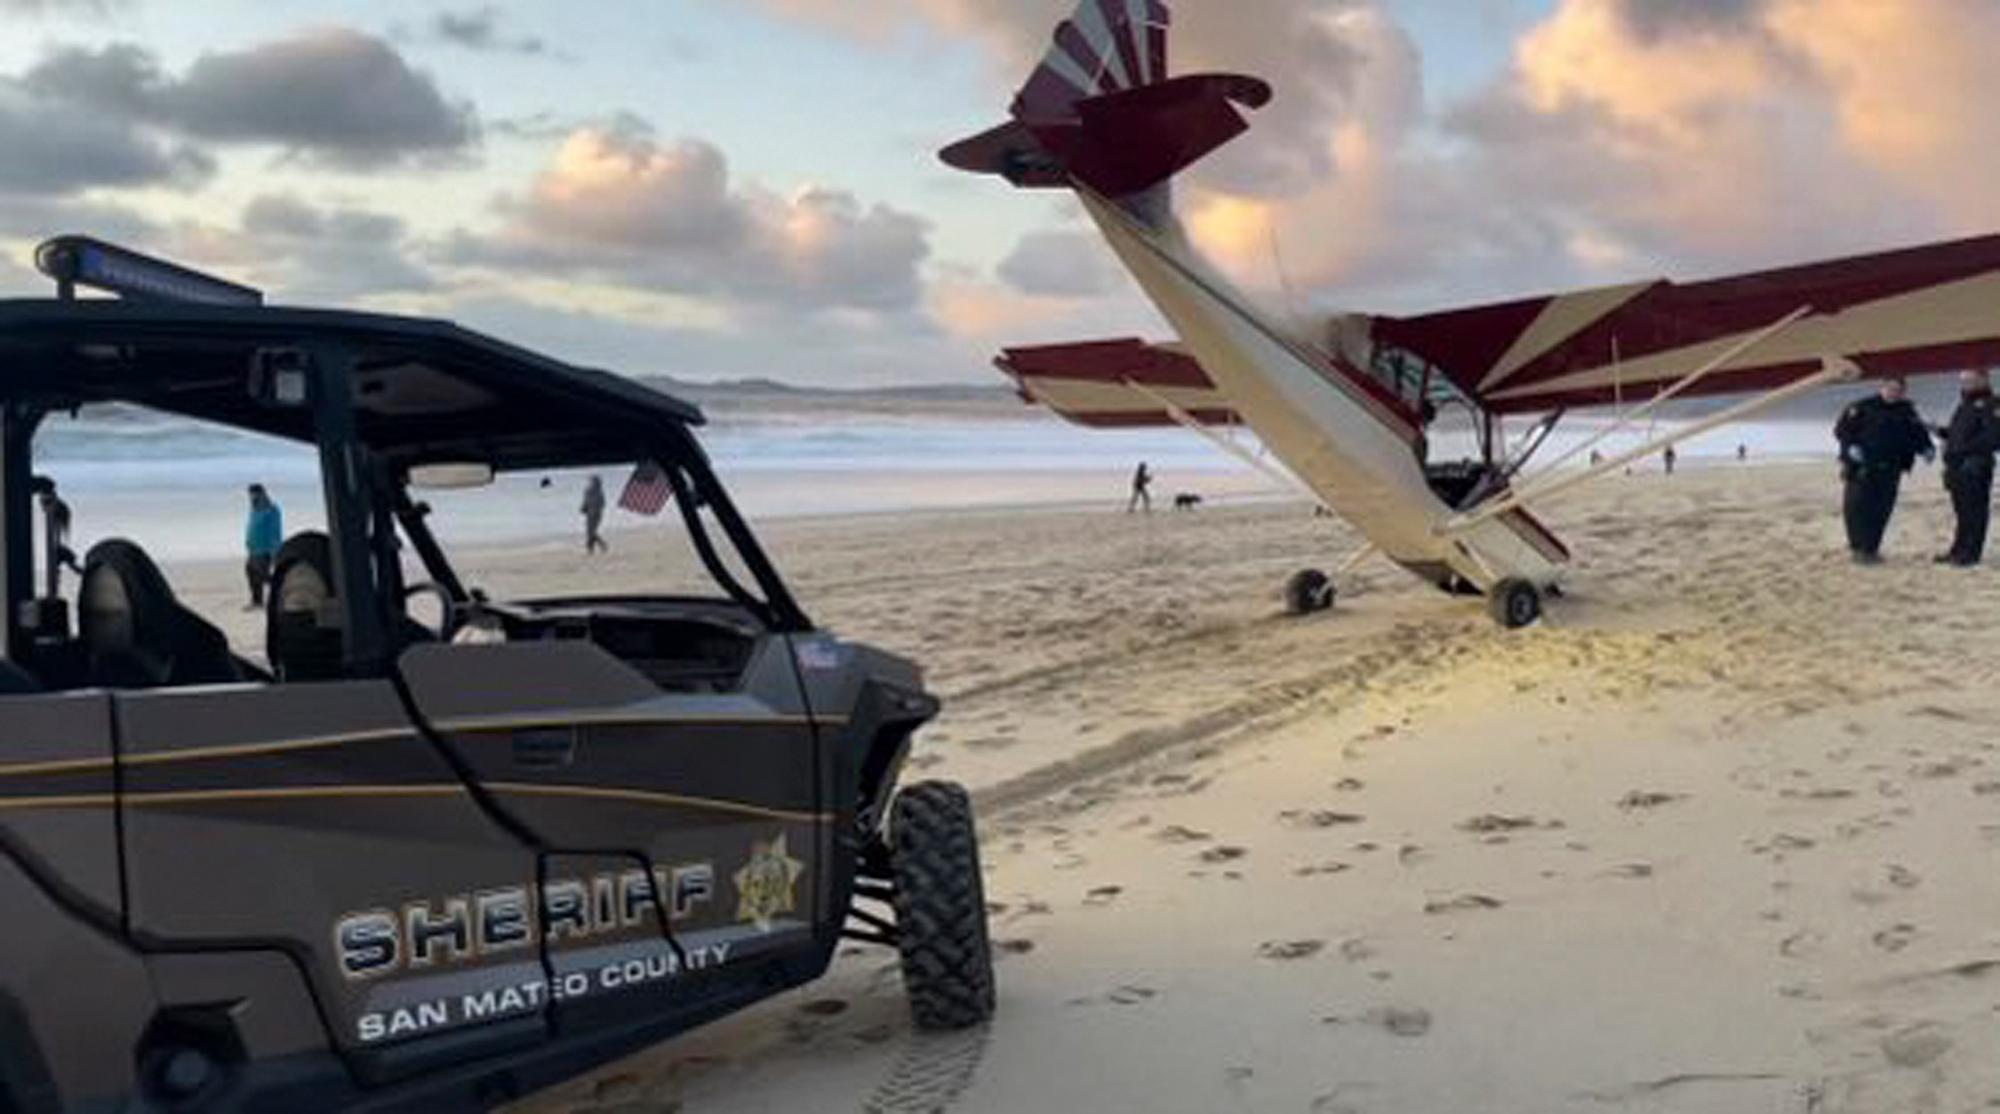 Miami Man Held After Stolen Small Plane Lands on Northern California Beach